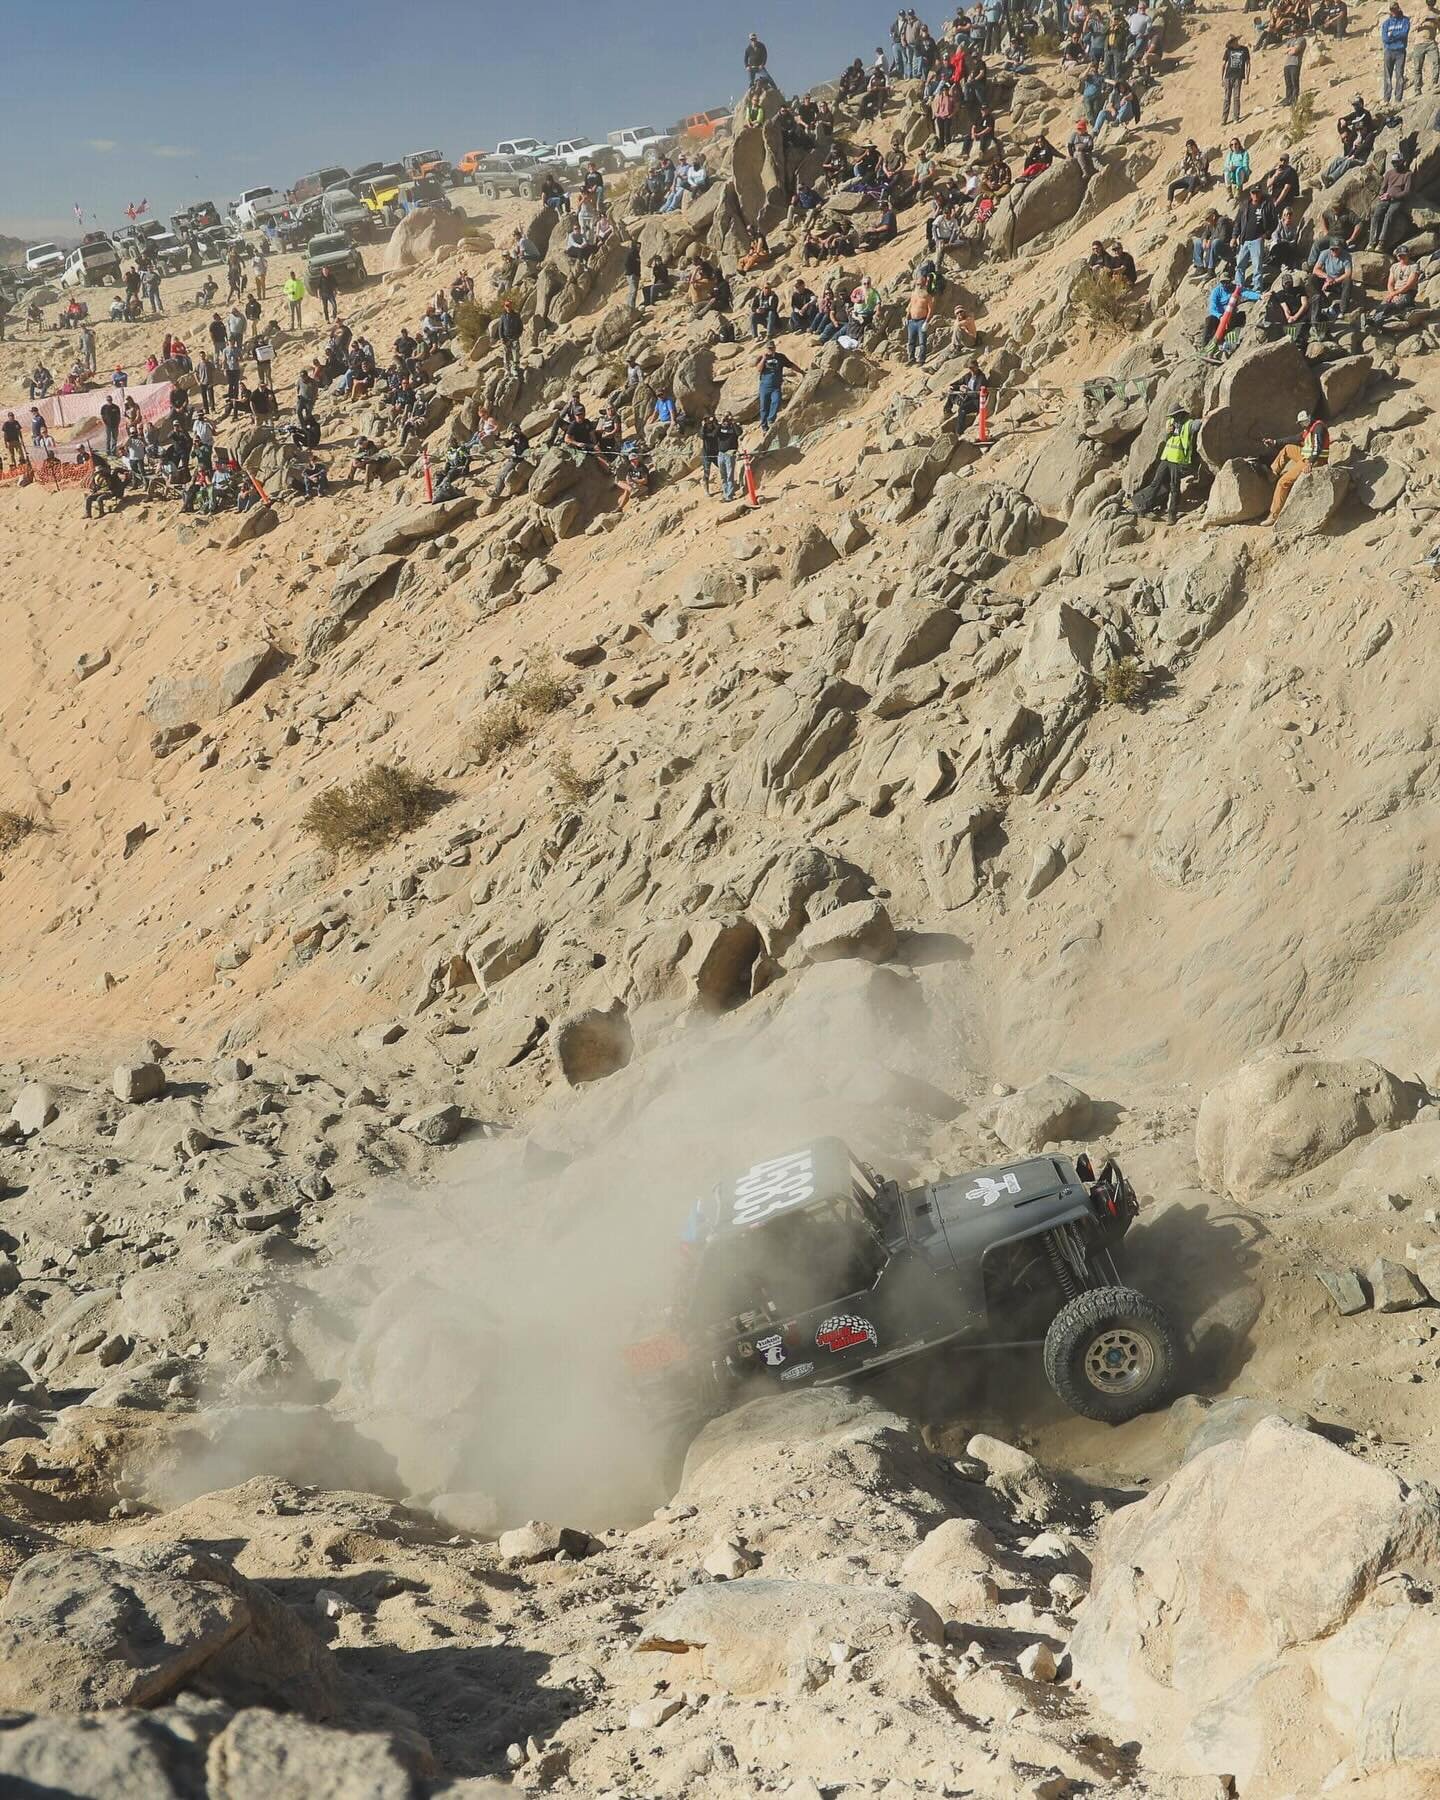 Cheering on all the cars at King of the Hammers! 

#koh #kingofthehammers